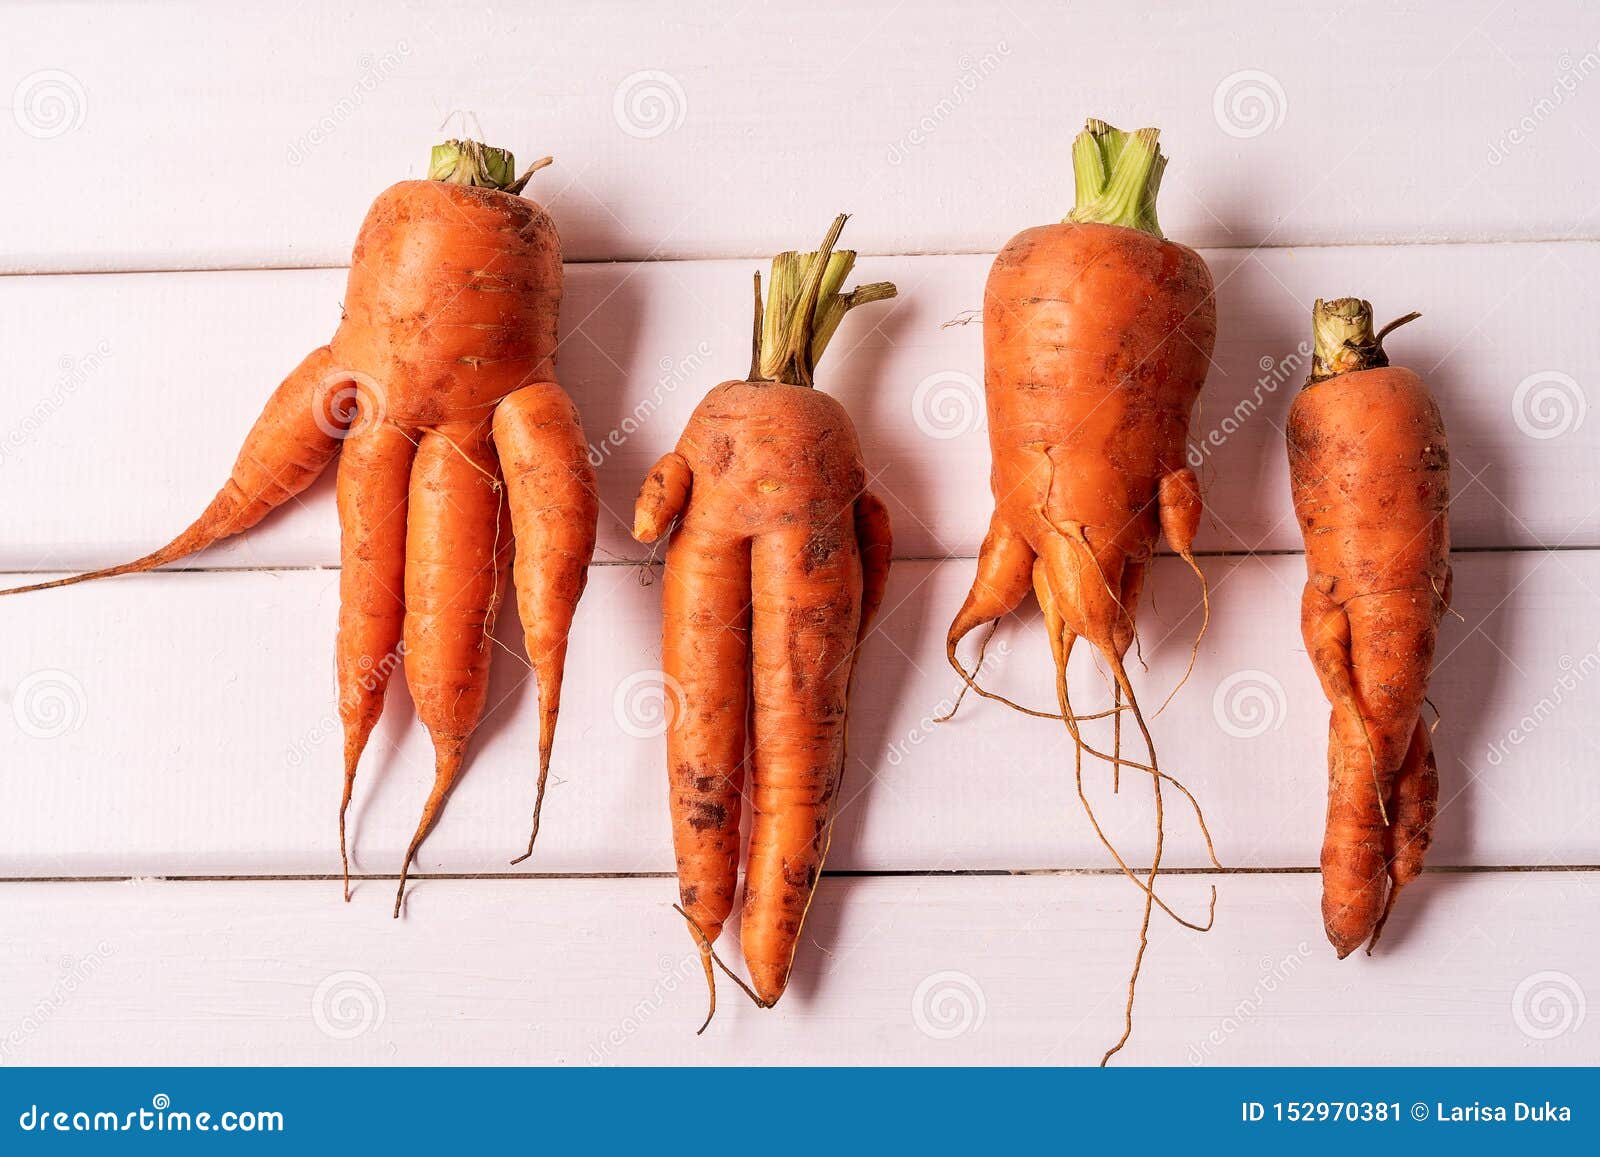 Some Ugly Curved Carrots On White Wooden Background Stock Image - Image of ...